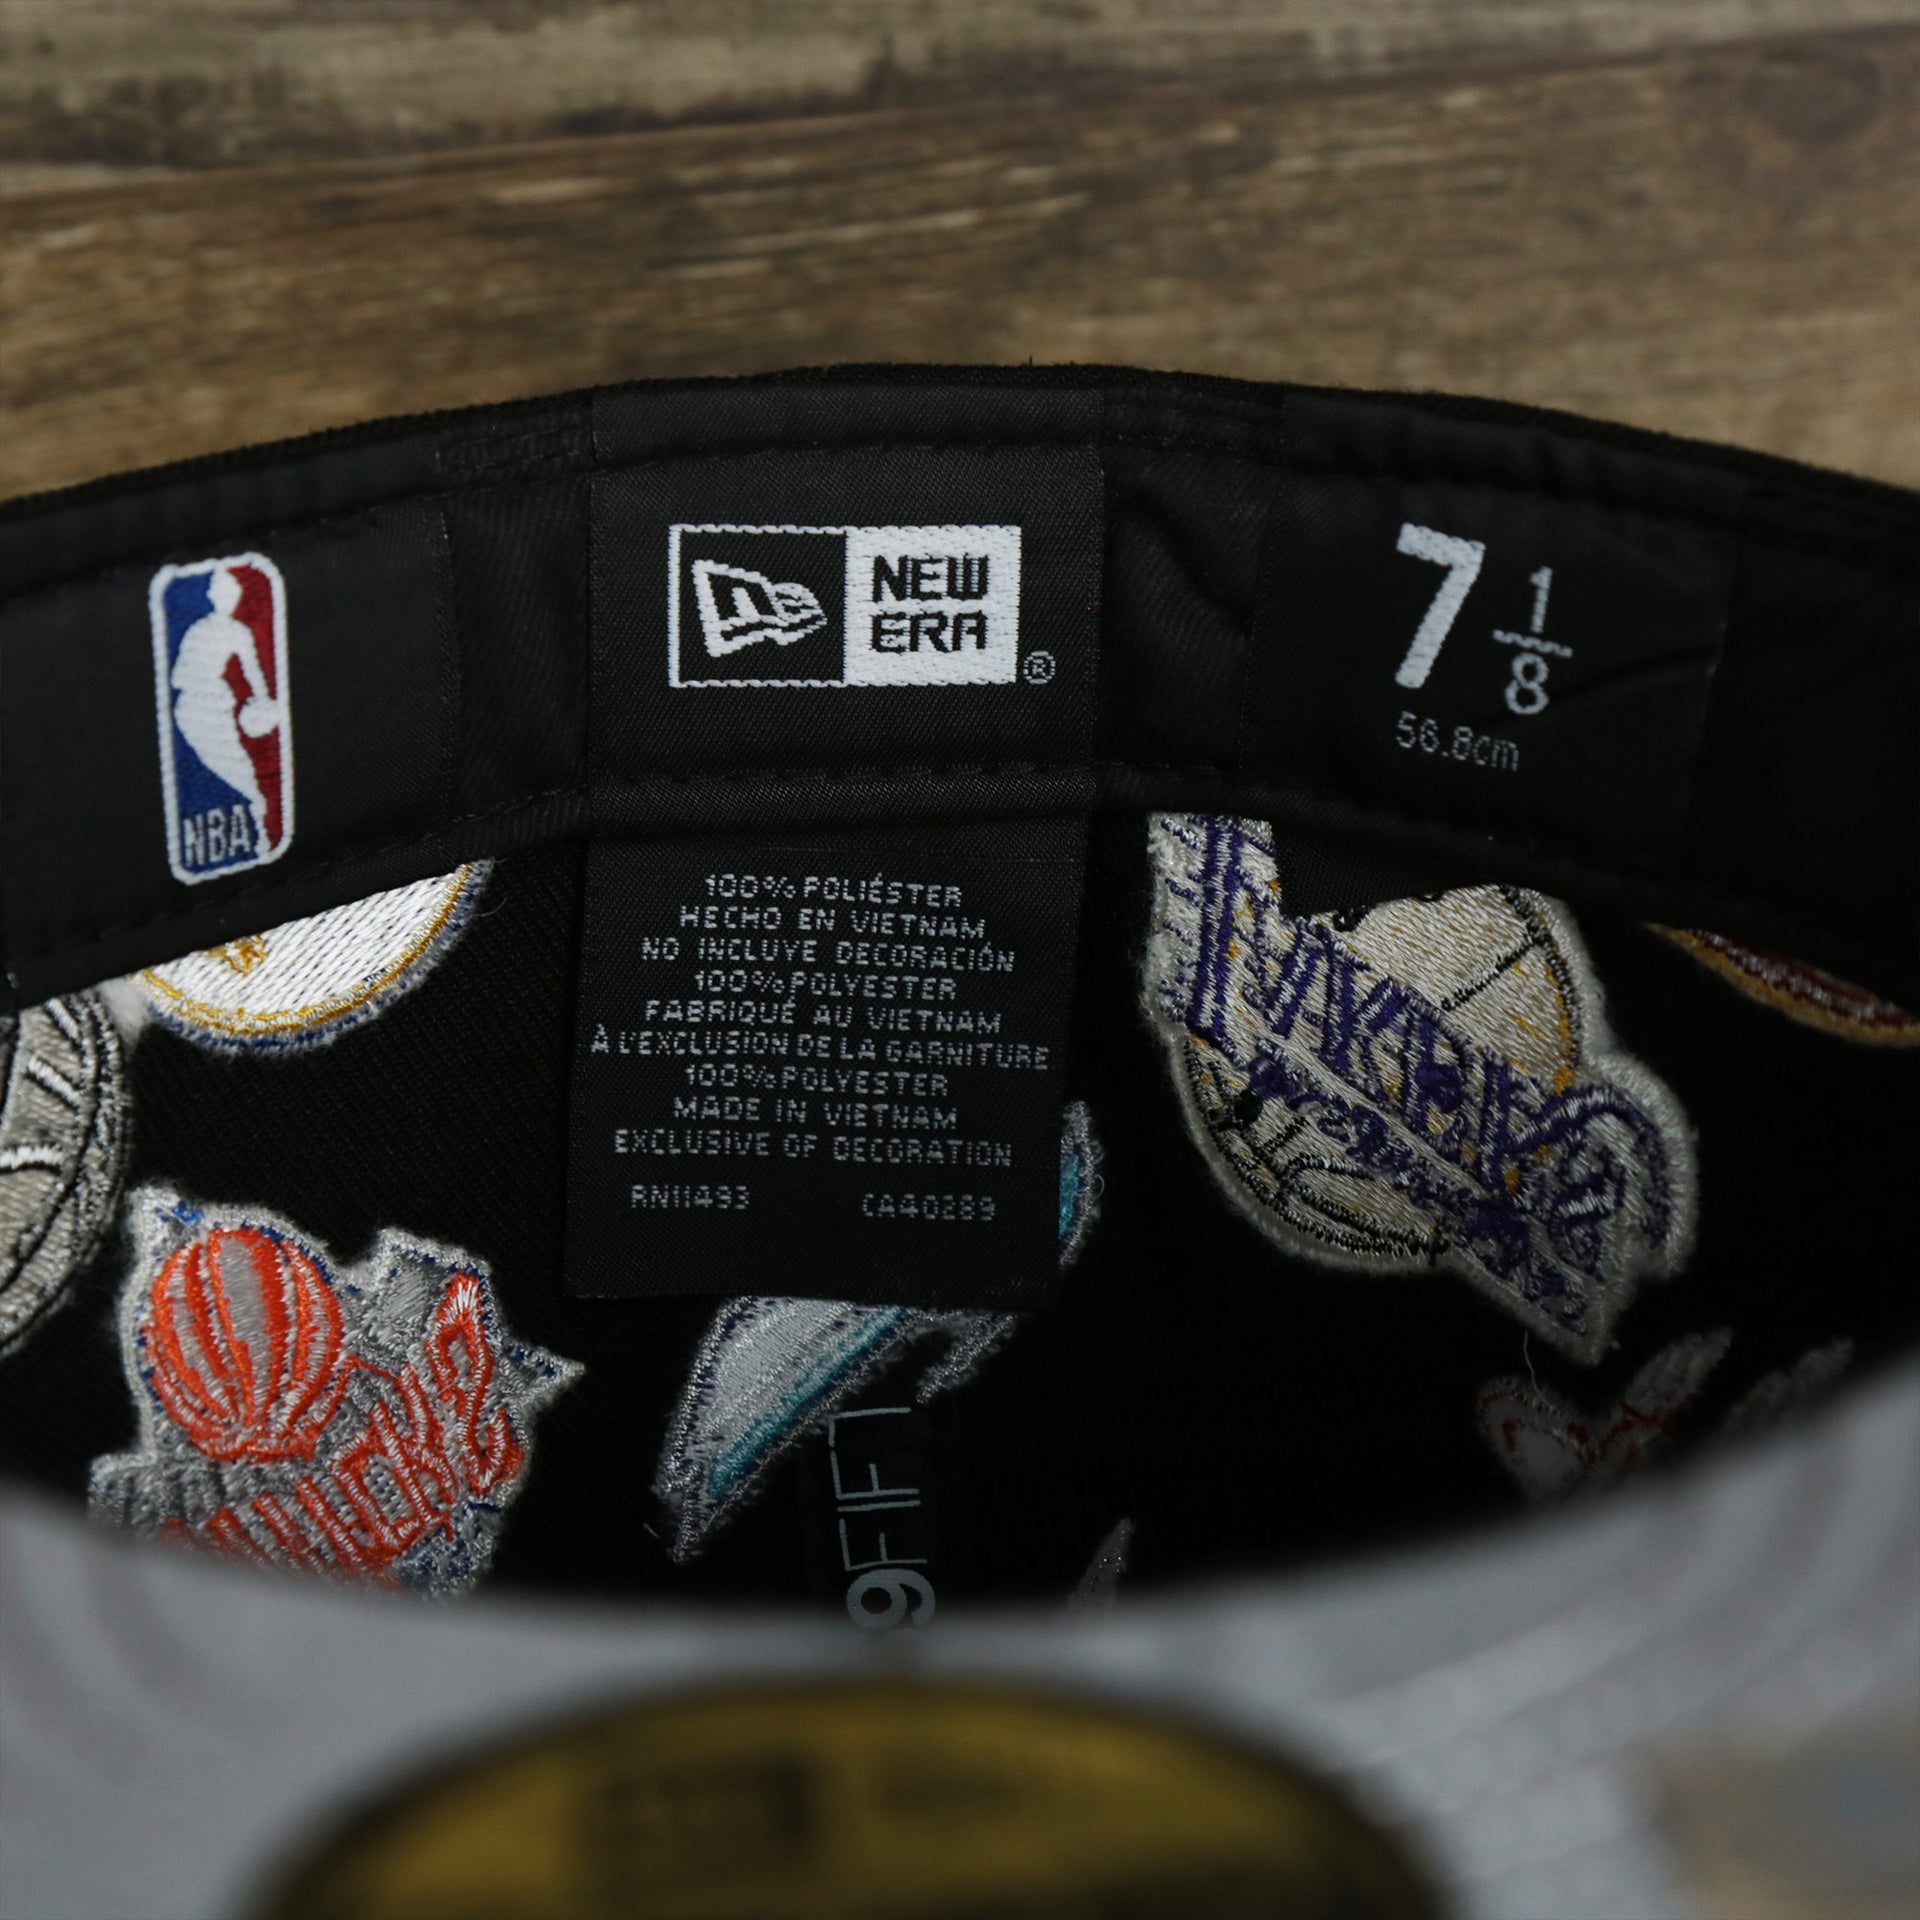 The NBA Tags and New Era Tags on the NBA Logo All Over patch fitted 59Fifty Cap with Gray Bottom | Black